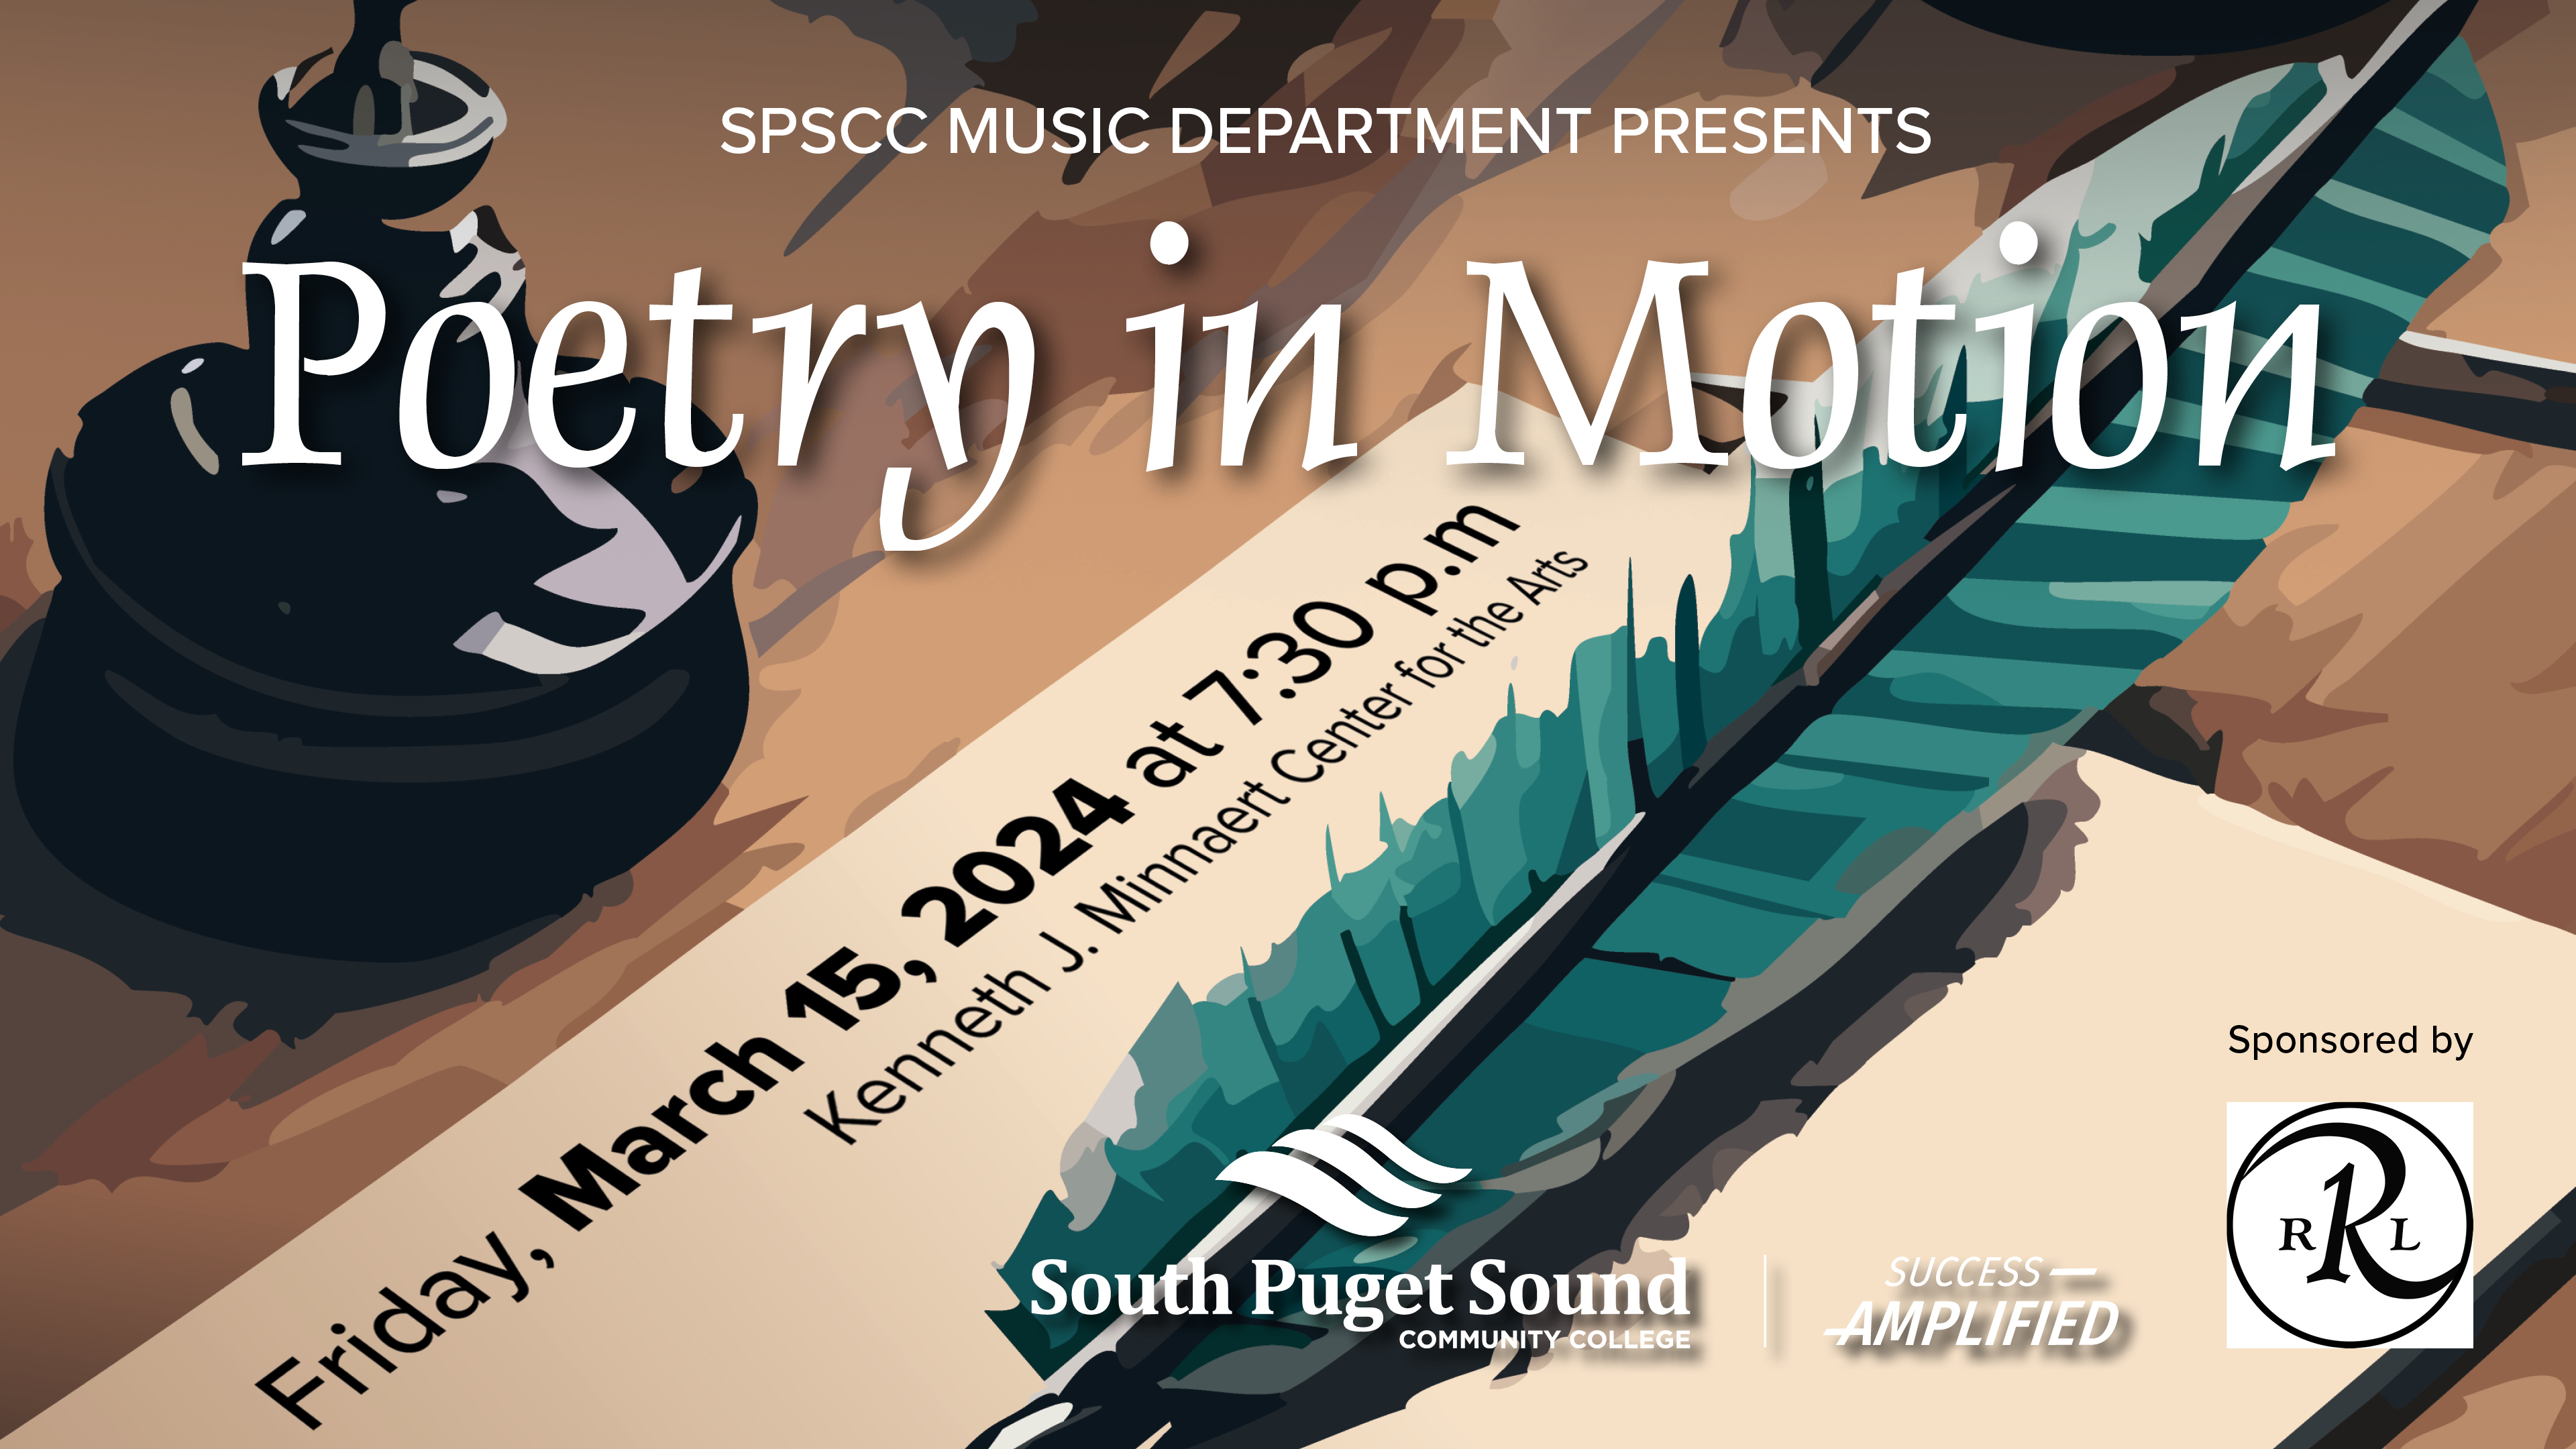 SPSCC Music Department presents Poetry in Motion. Friday, March 15, 2024 at 7:30 p.m. Kenneth J. Minnaert Center for the Arts. Sponsored by R.L. Ray Violin Shop.